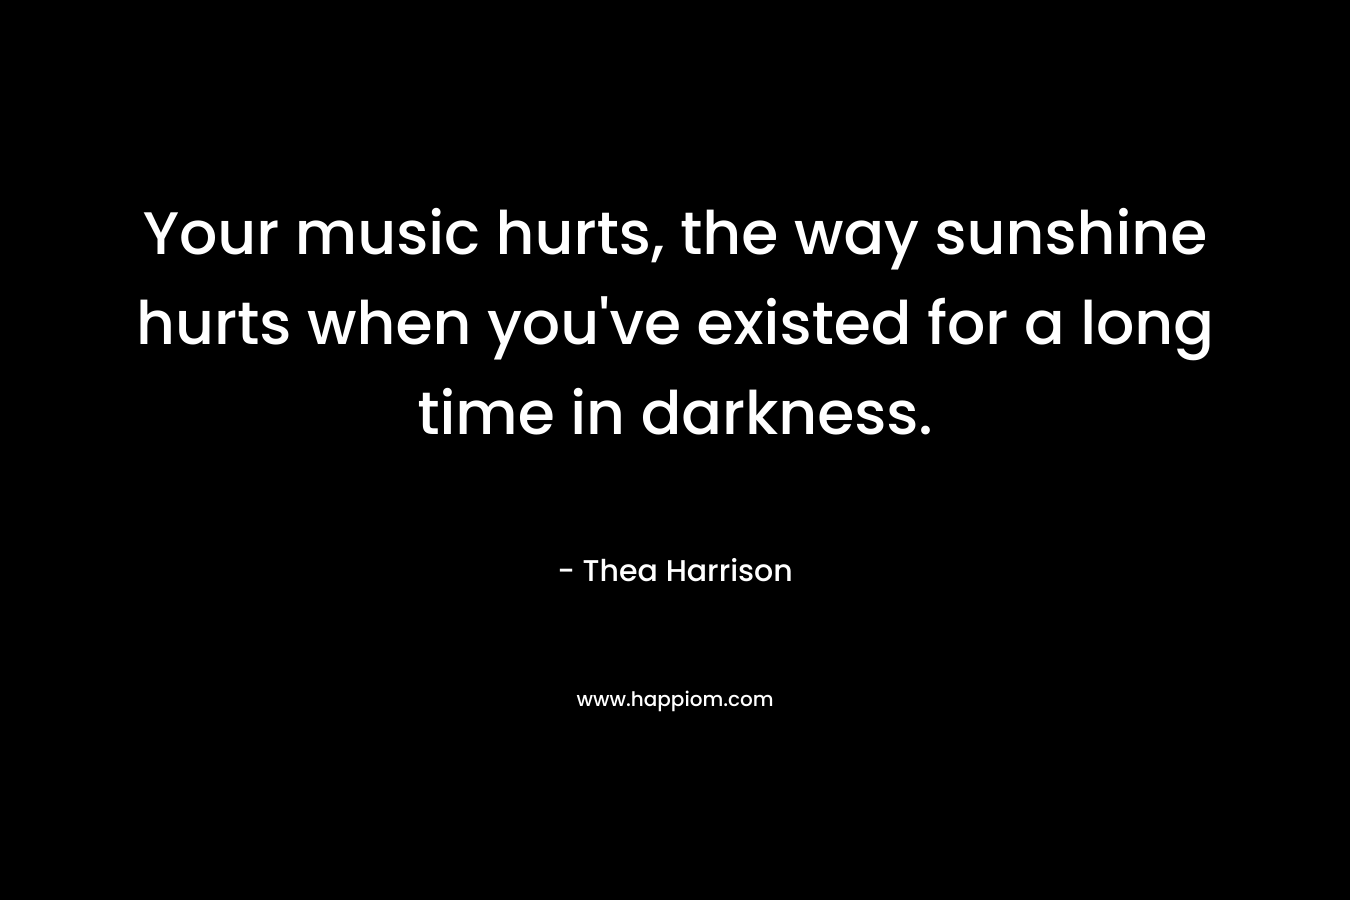 Your music hurts, the way sunshine hurts when you've existed for a long time in darkness.